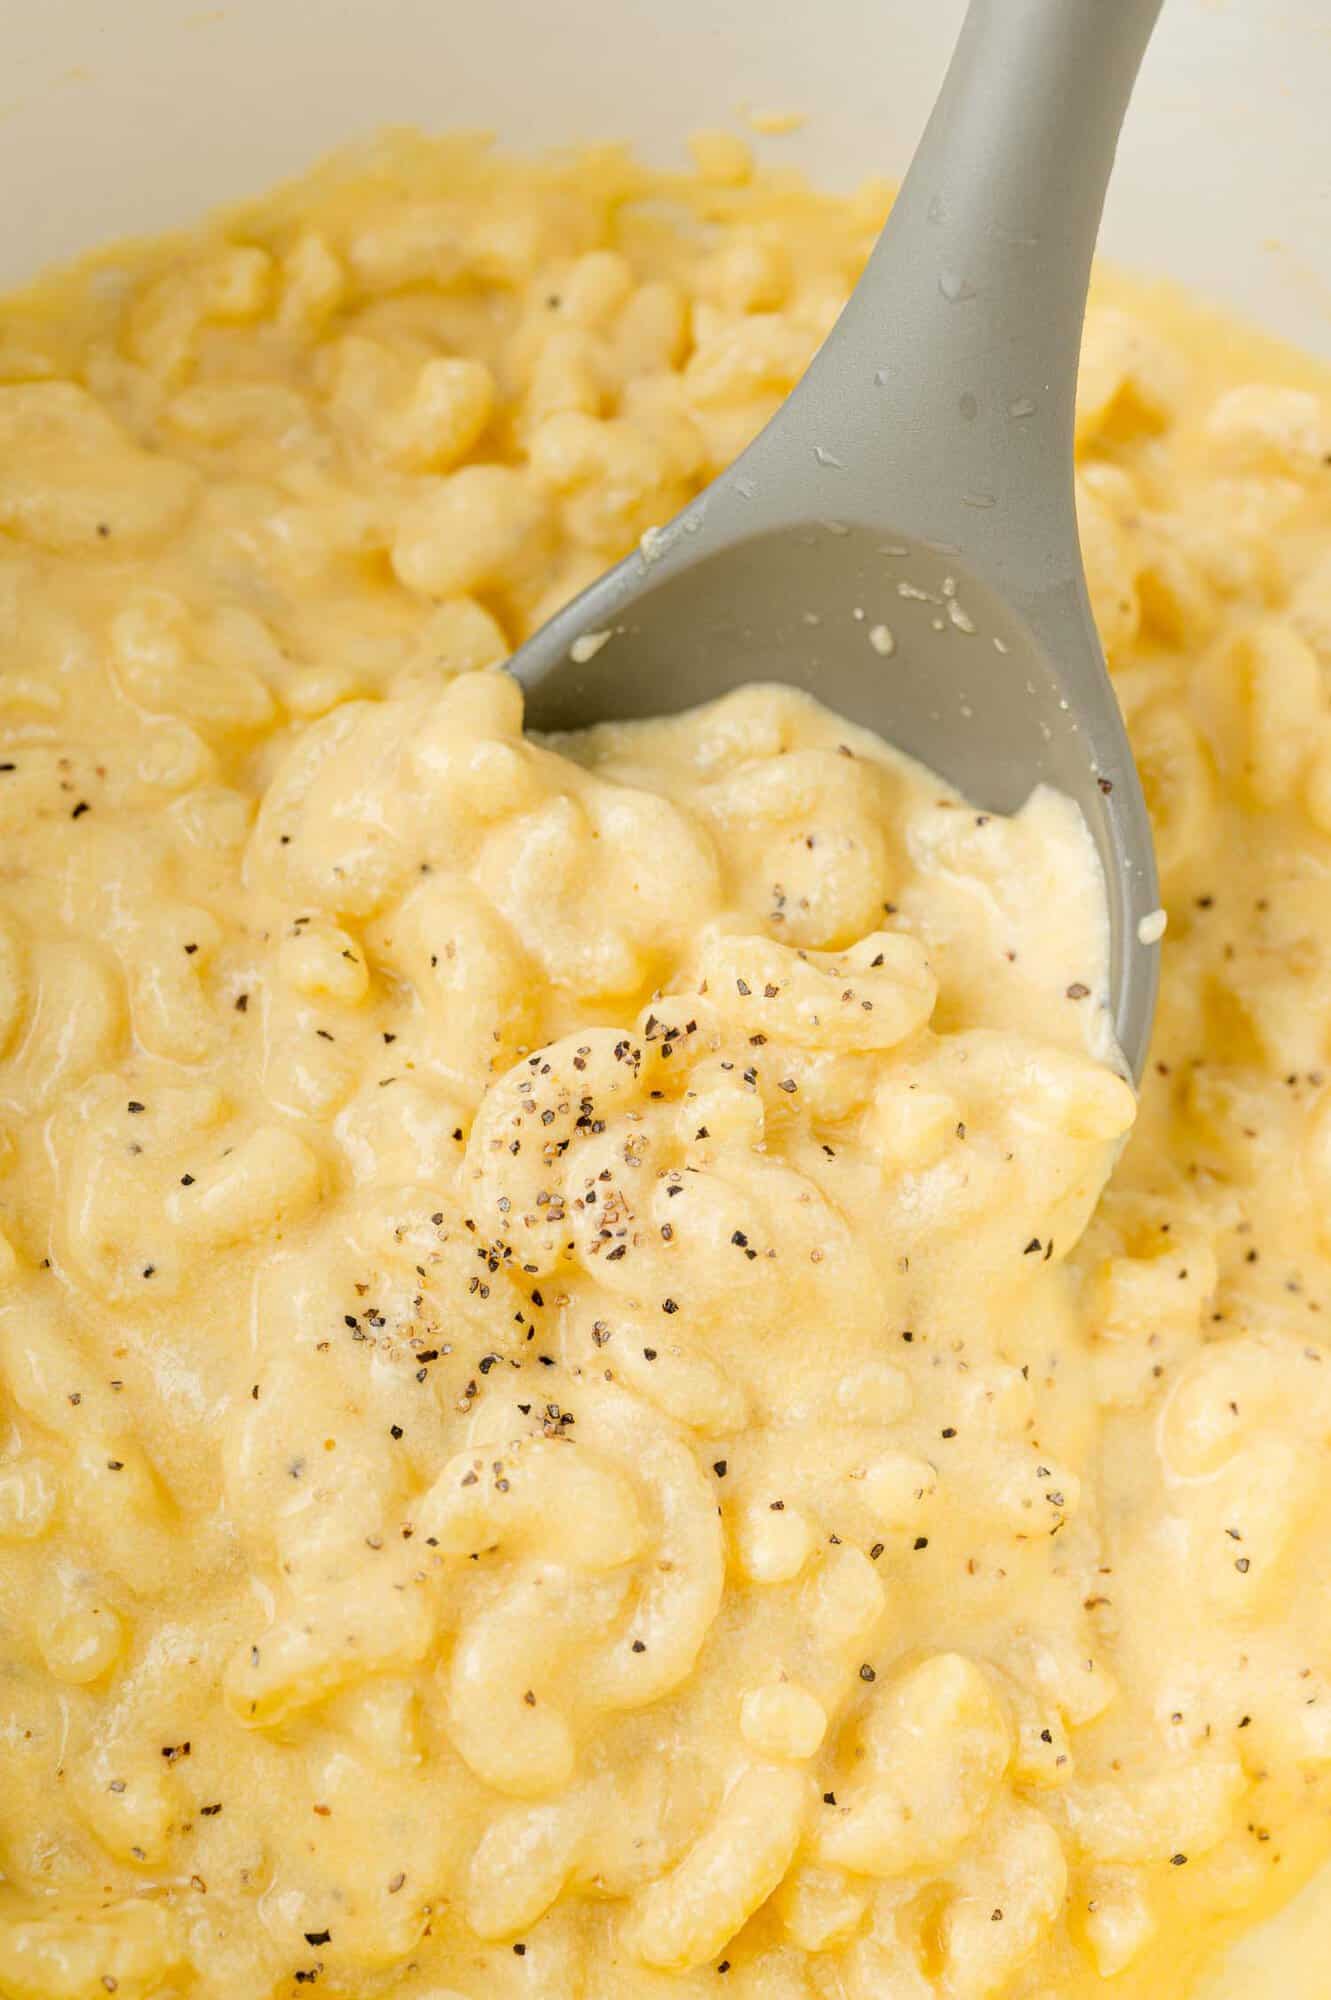 Large serving spoon in a pot of macaroni and cheese.